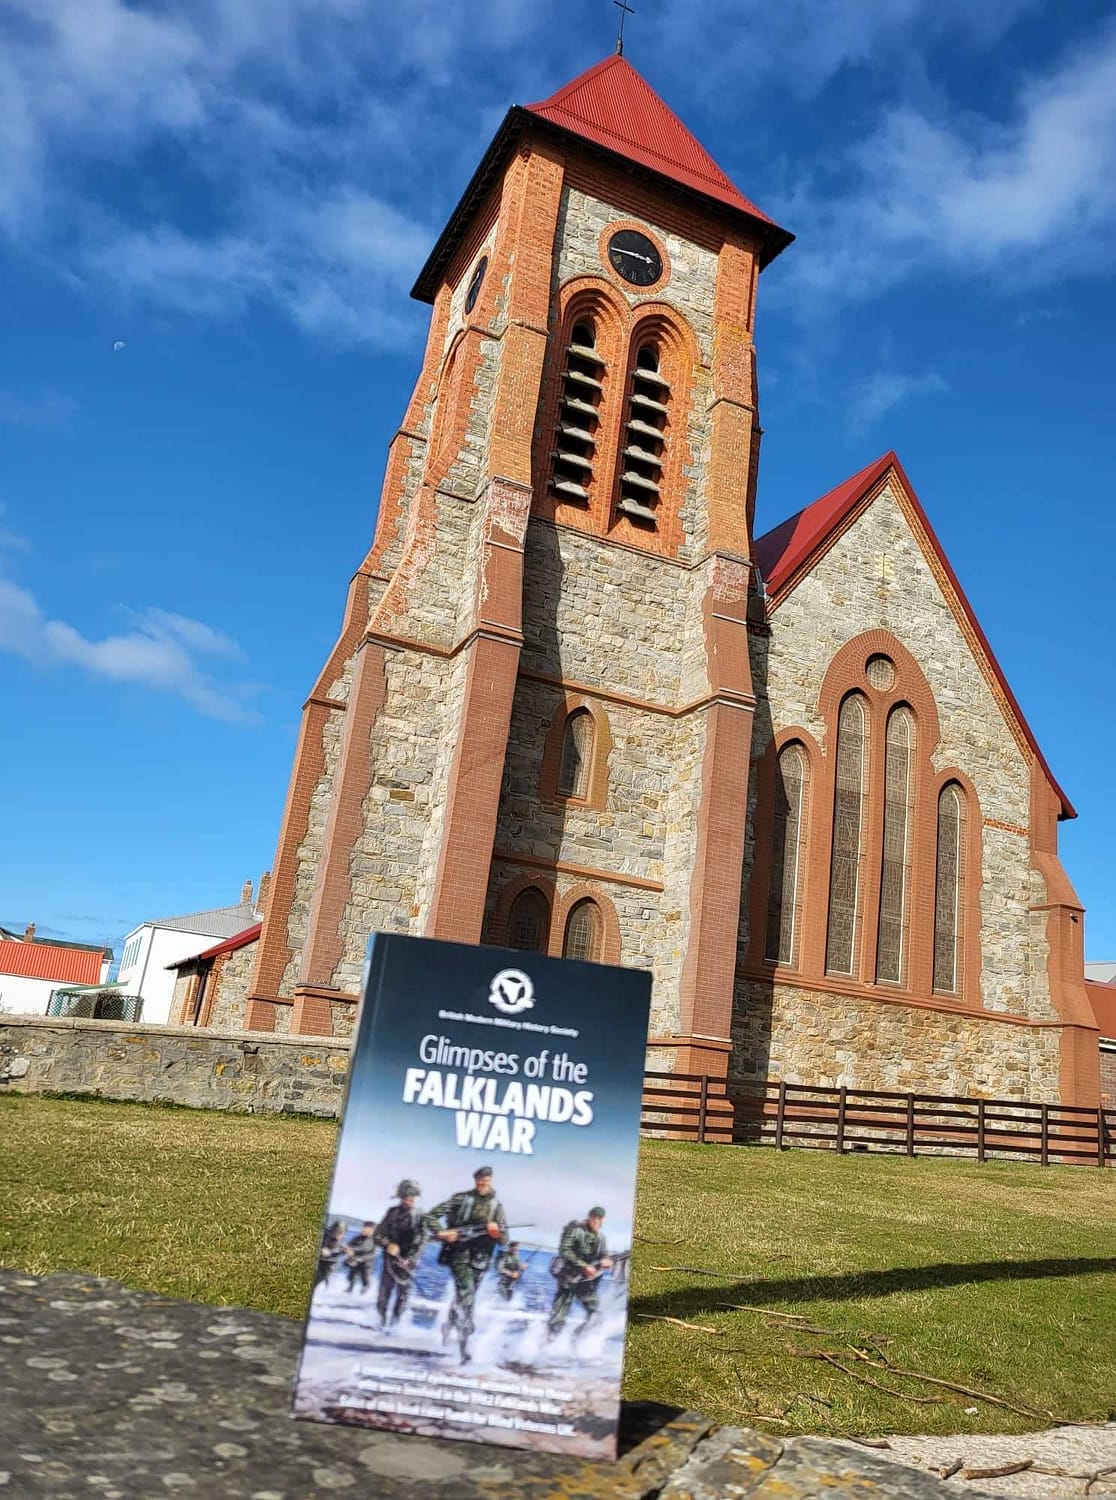 BMMHS Glimpses of the Falklands War has arrived in Stanley